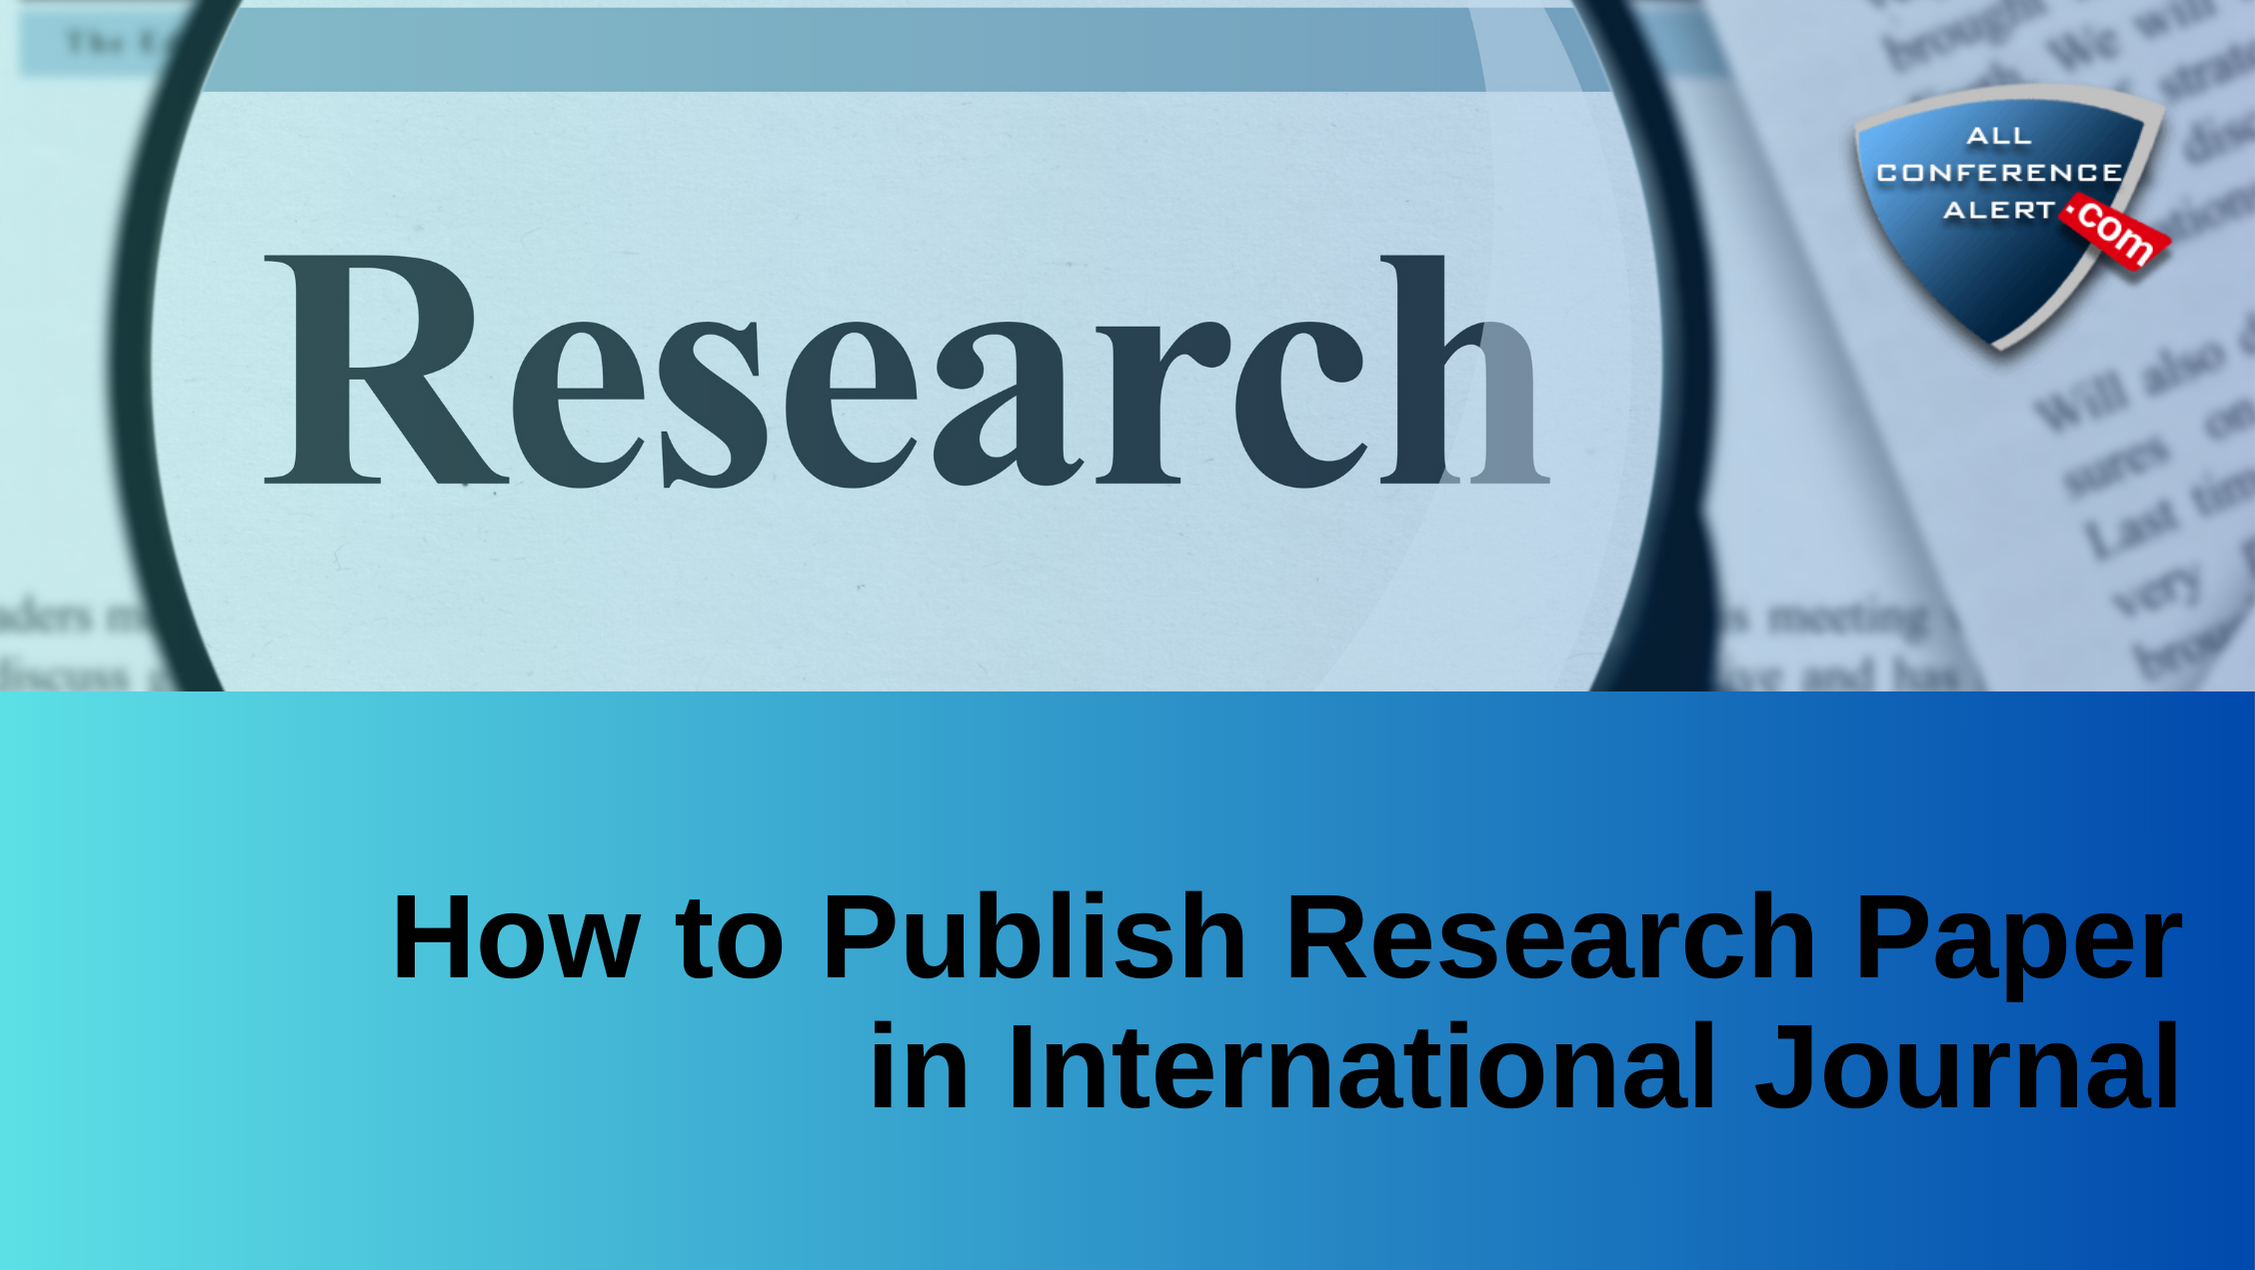 can i publish research paper without affiliation